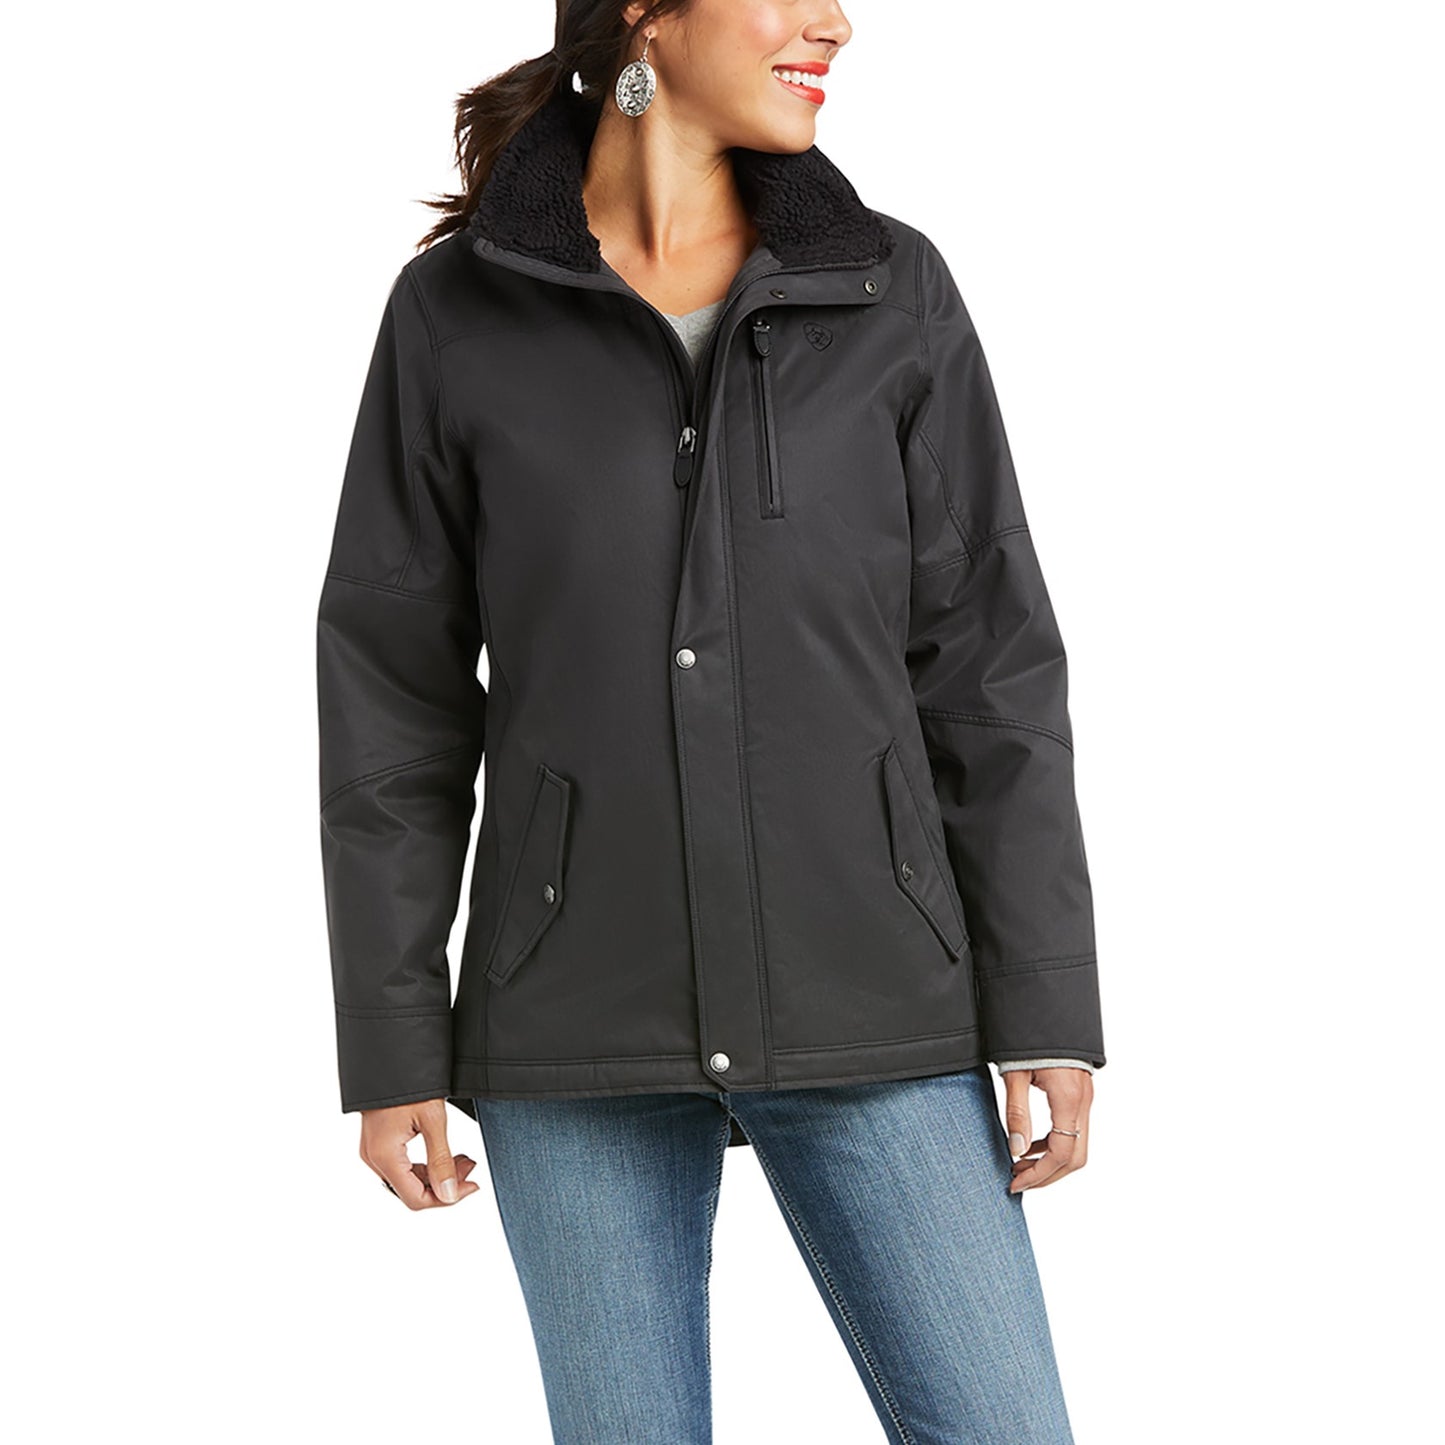 Ariat Ladies REAL Grizzly Concealed Carry Phantom Jacket 10037470